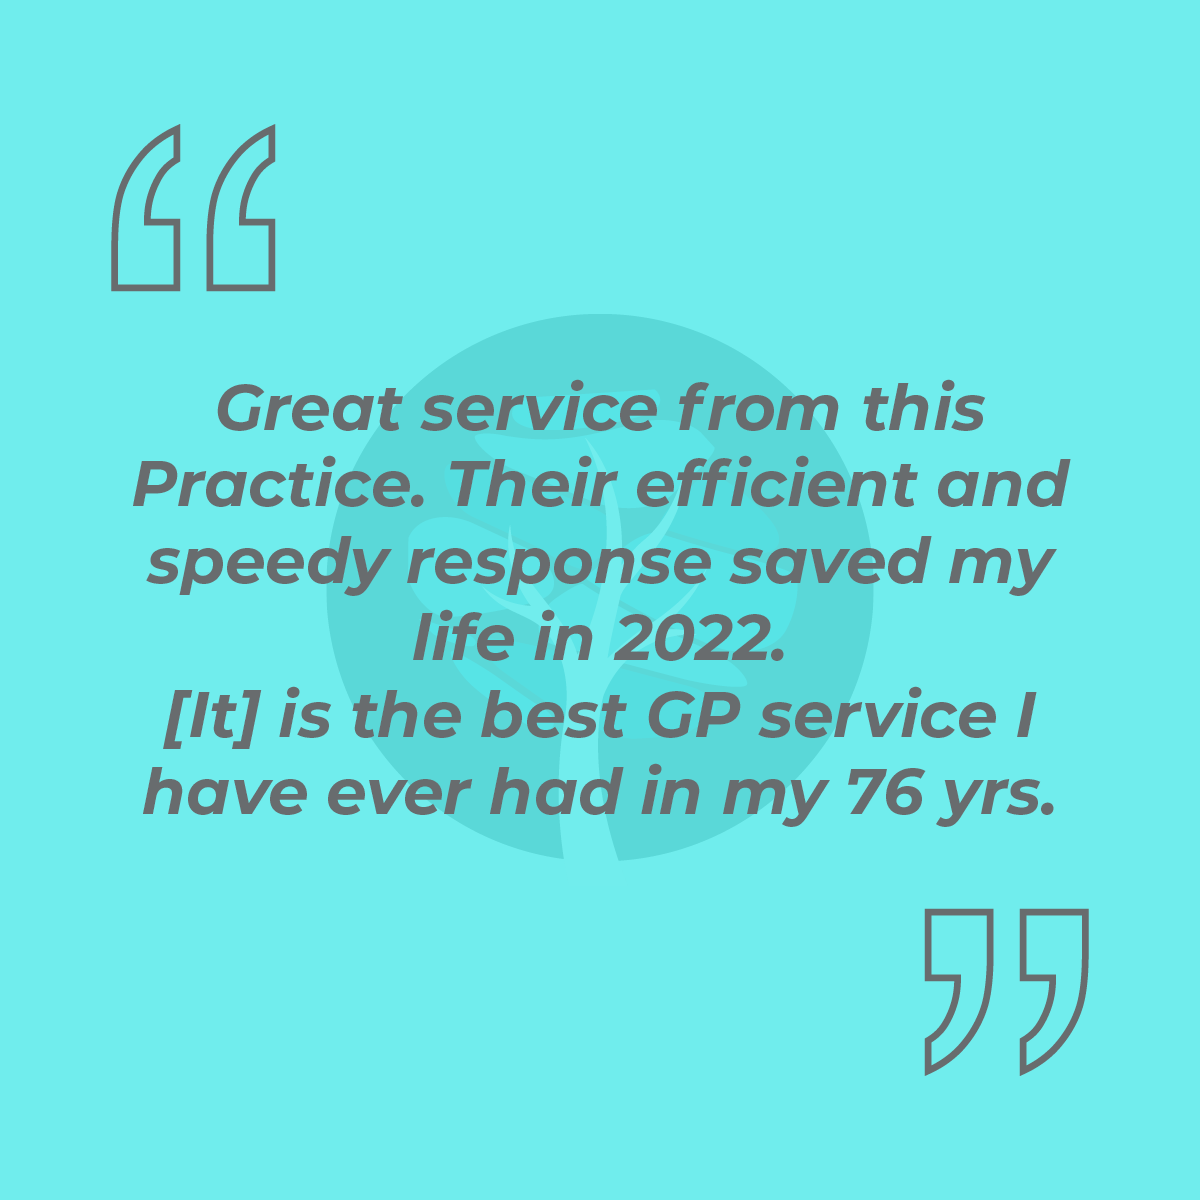 Great service from this Practice. Their efficient and speedy response saved my life in 2022. [It] is the best GP service I have ever had in my 76 yrs.